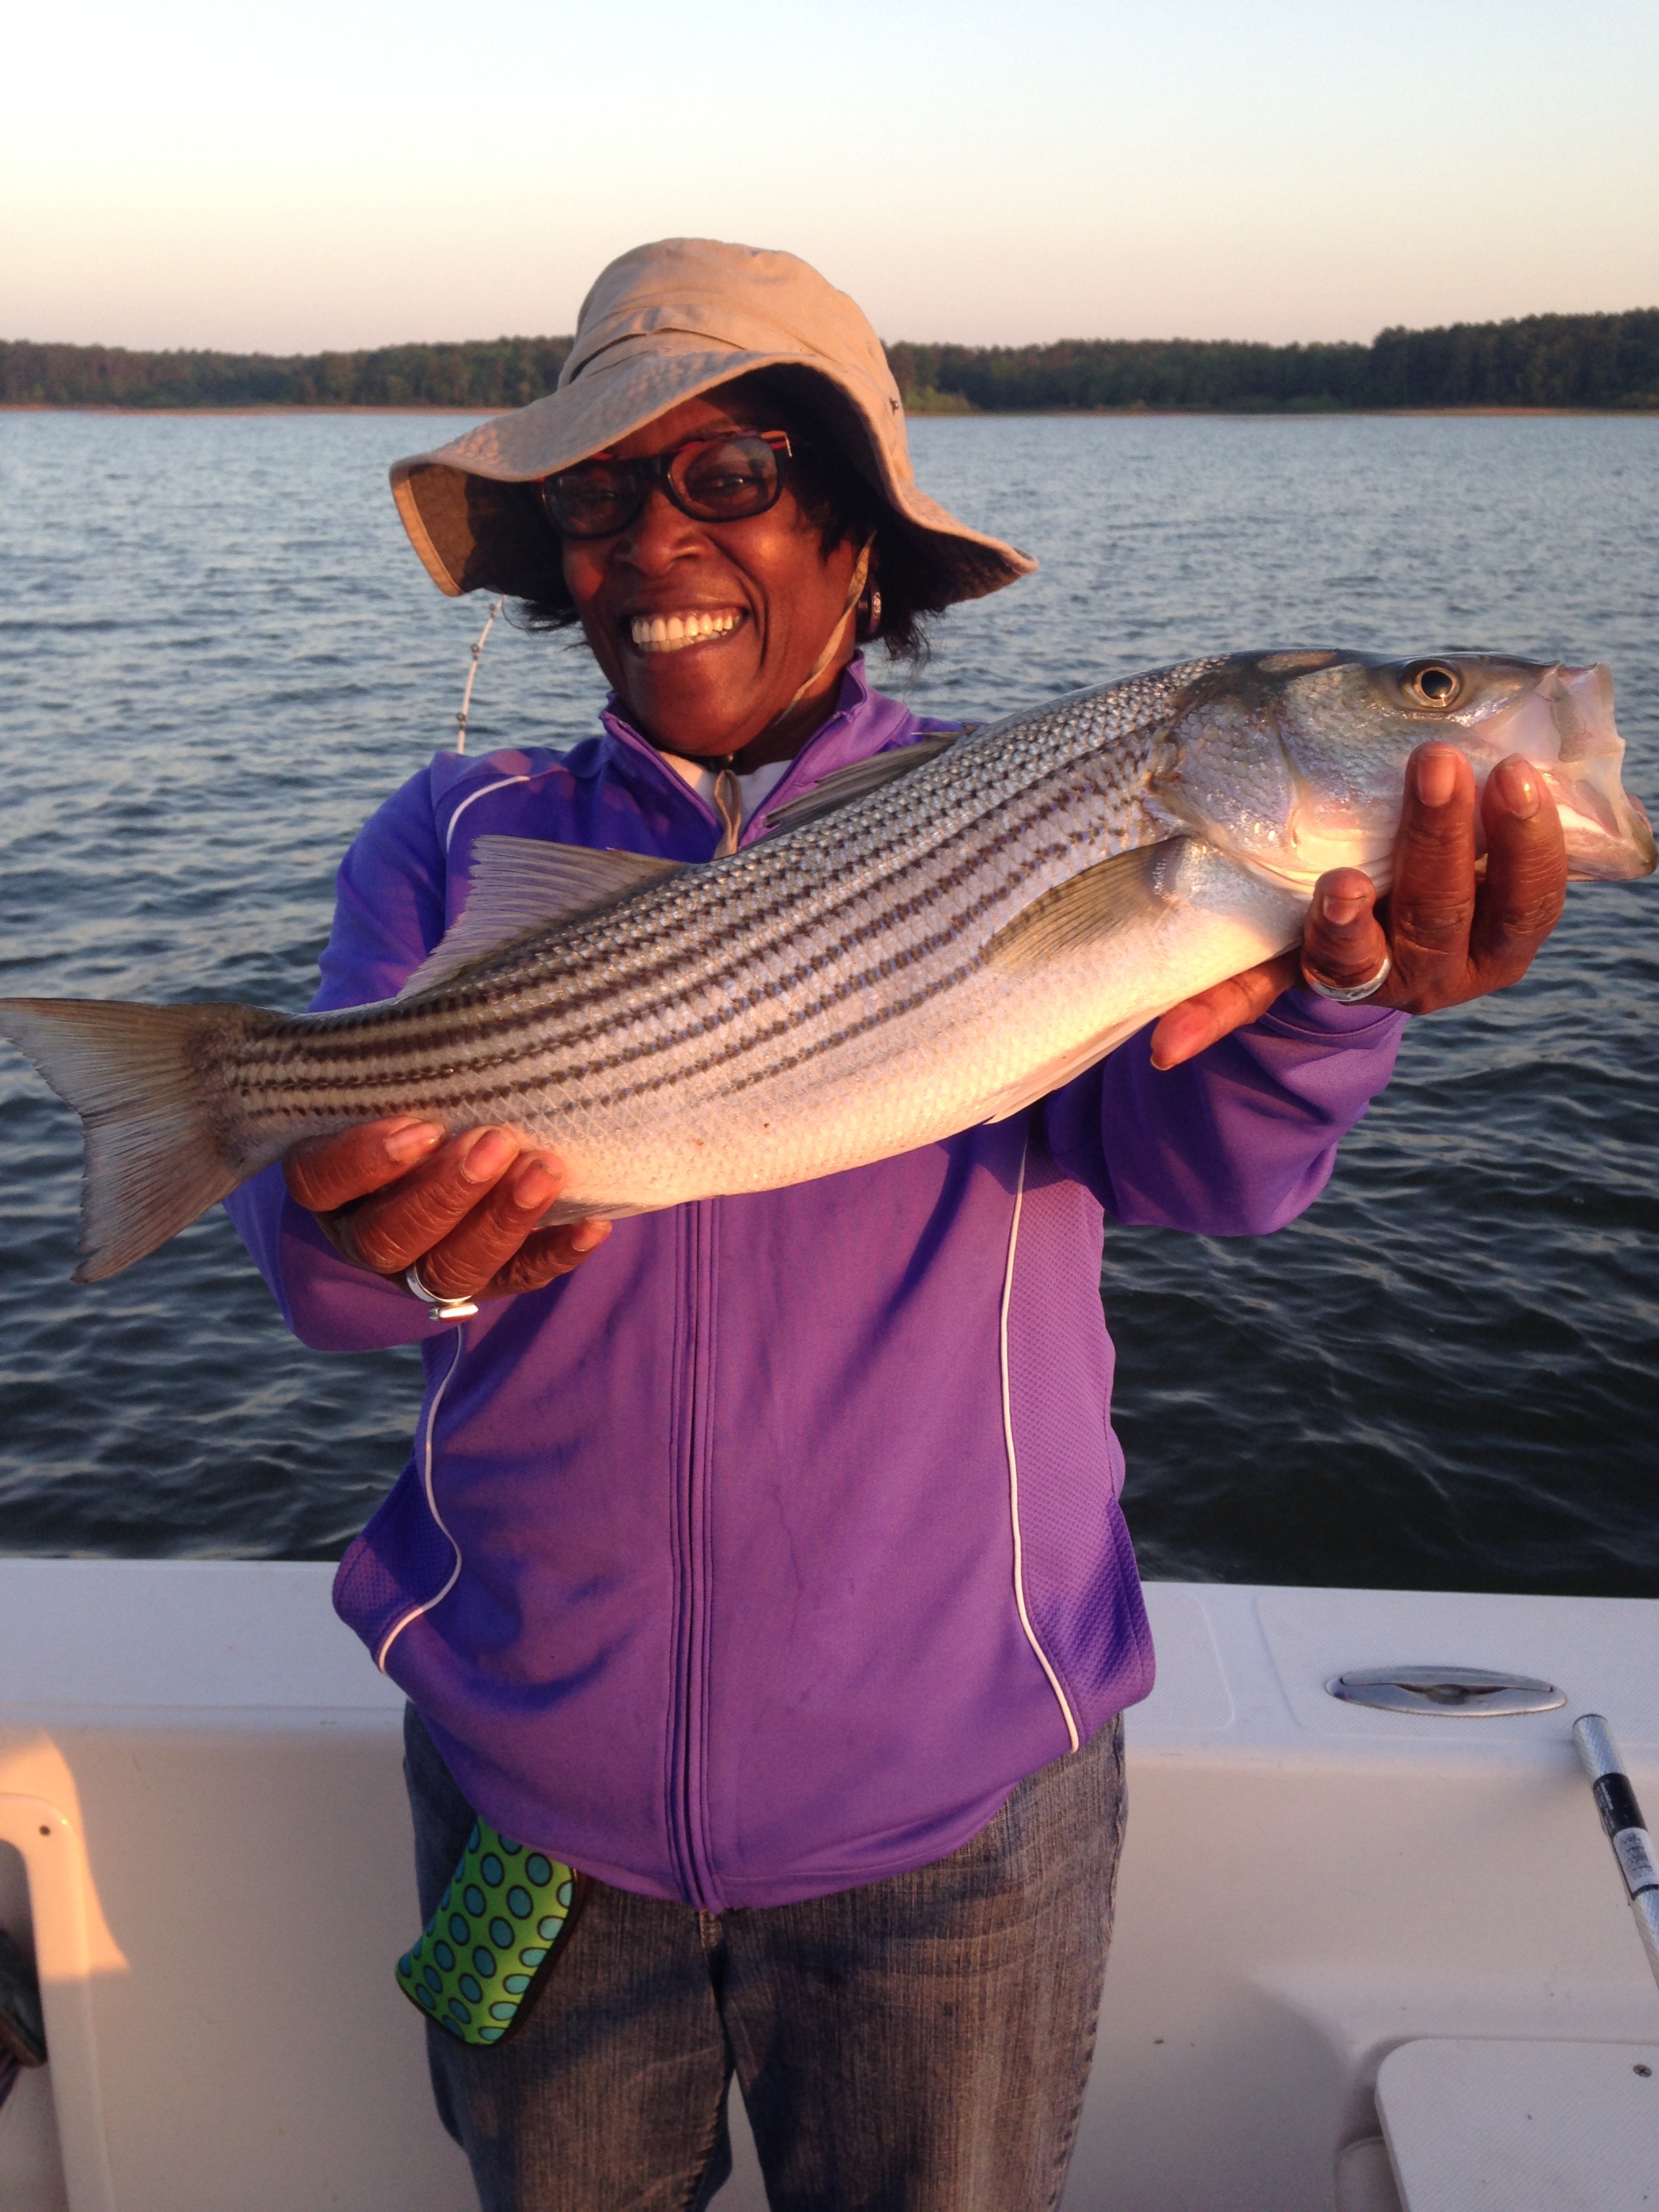 April 22, 2017 Romell Cook with her big hybrid